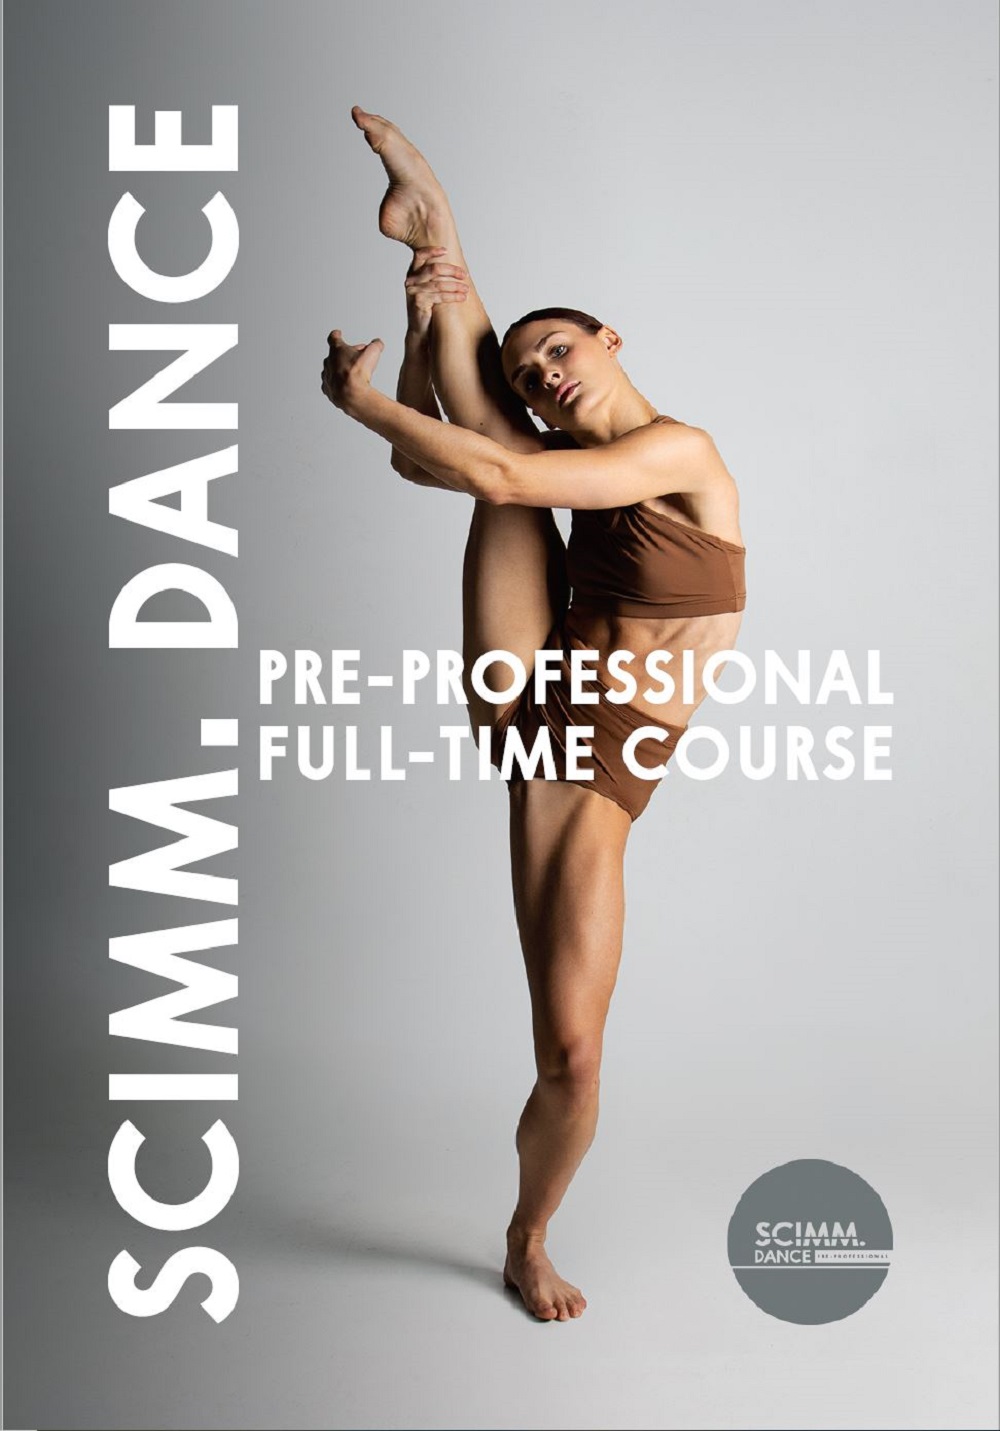 Introducing Scimm. Dance Pre-Professional: a groundbreaking journey into dance education